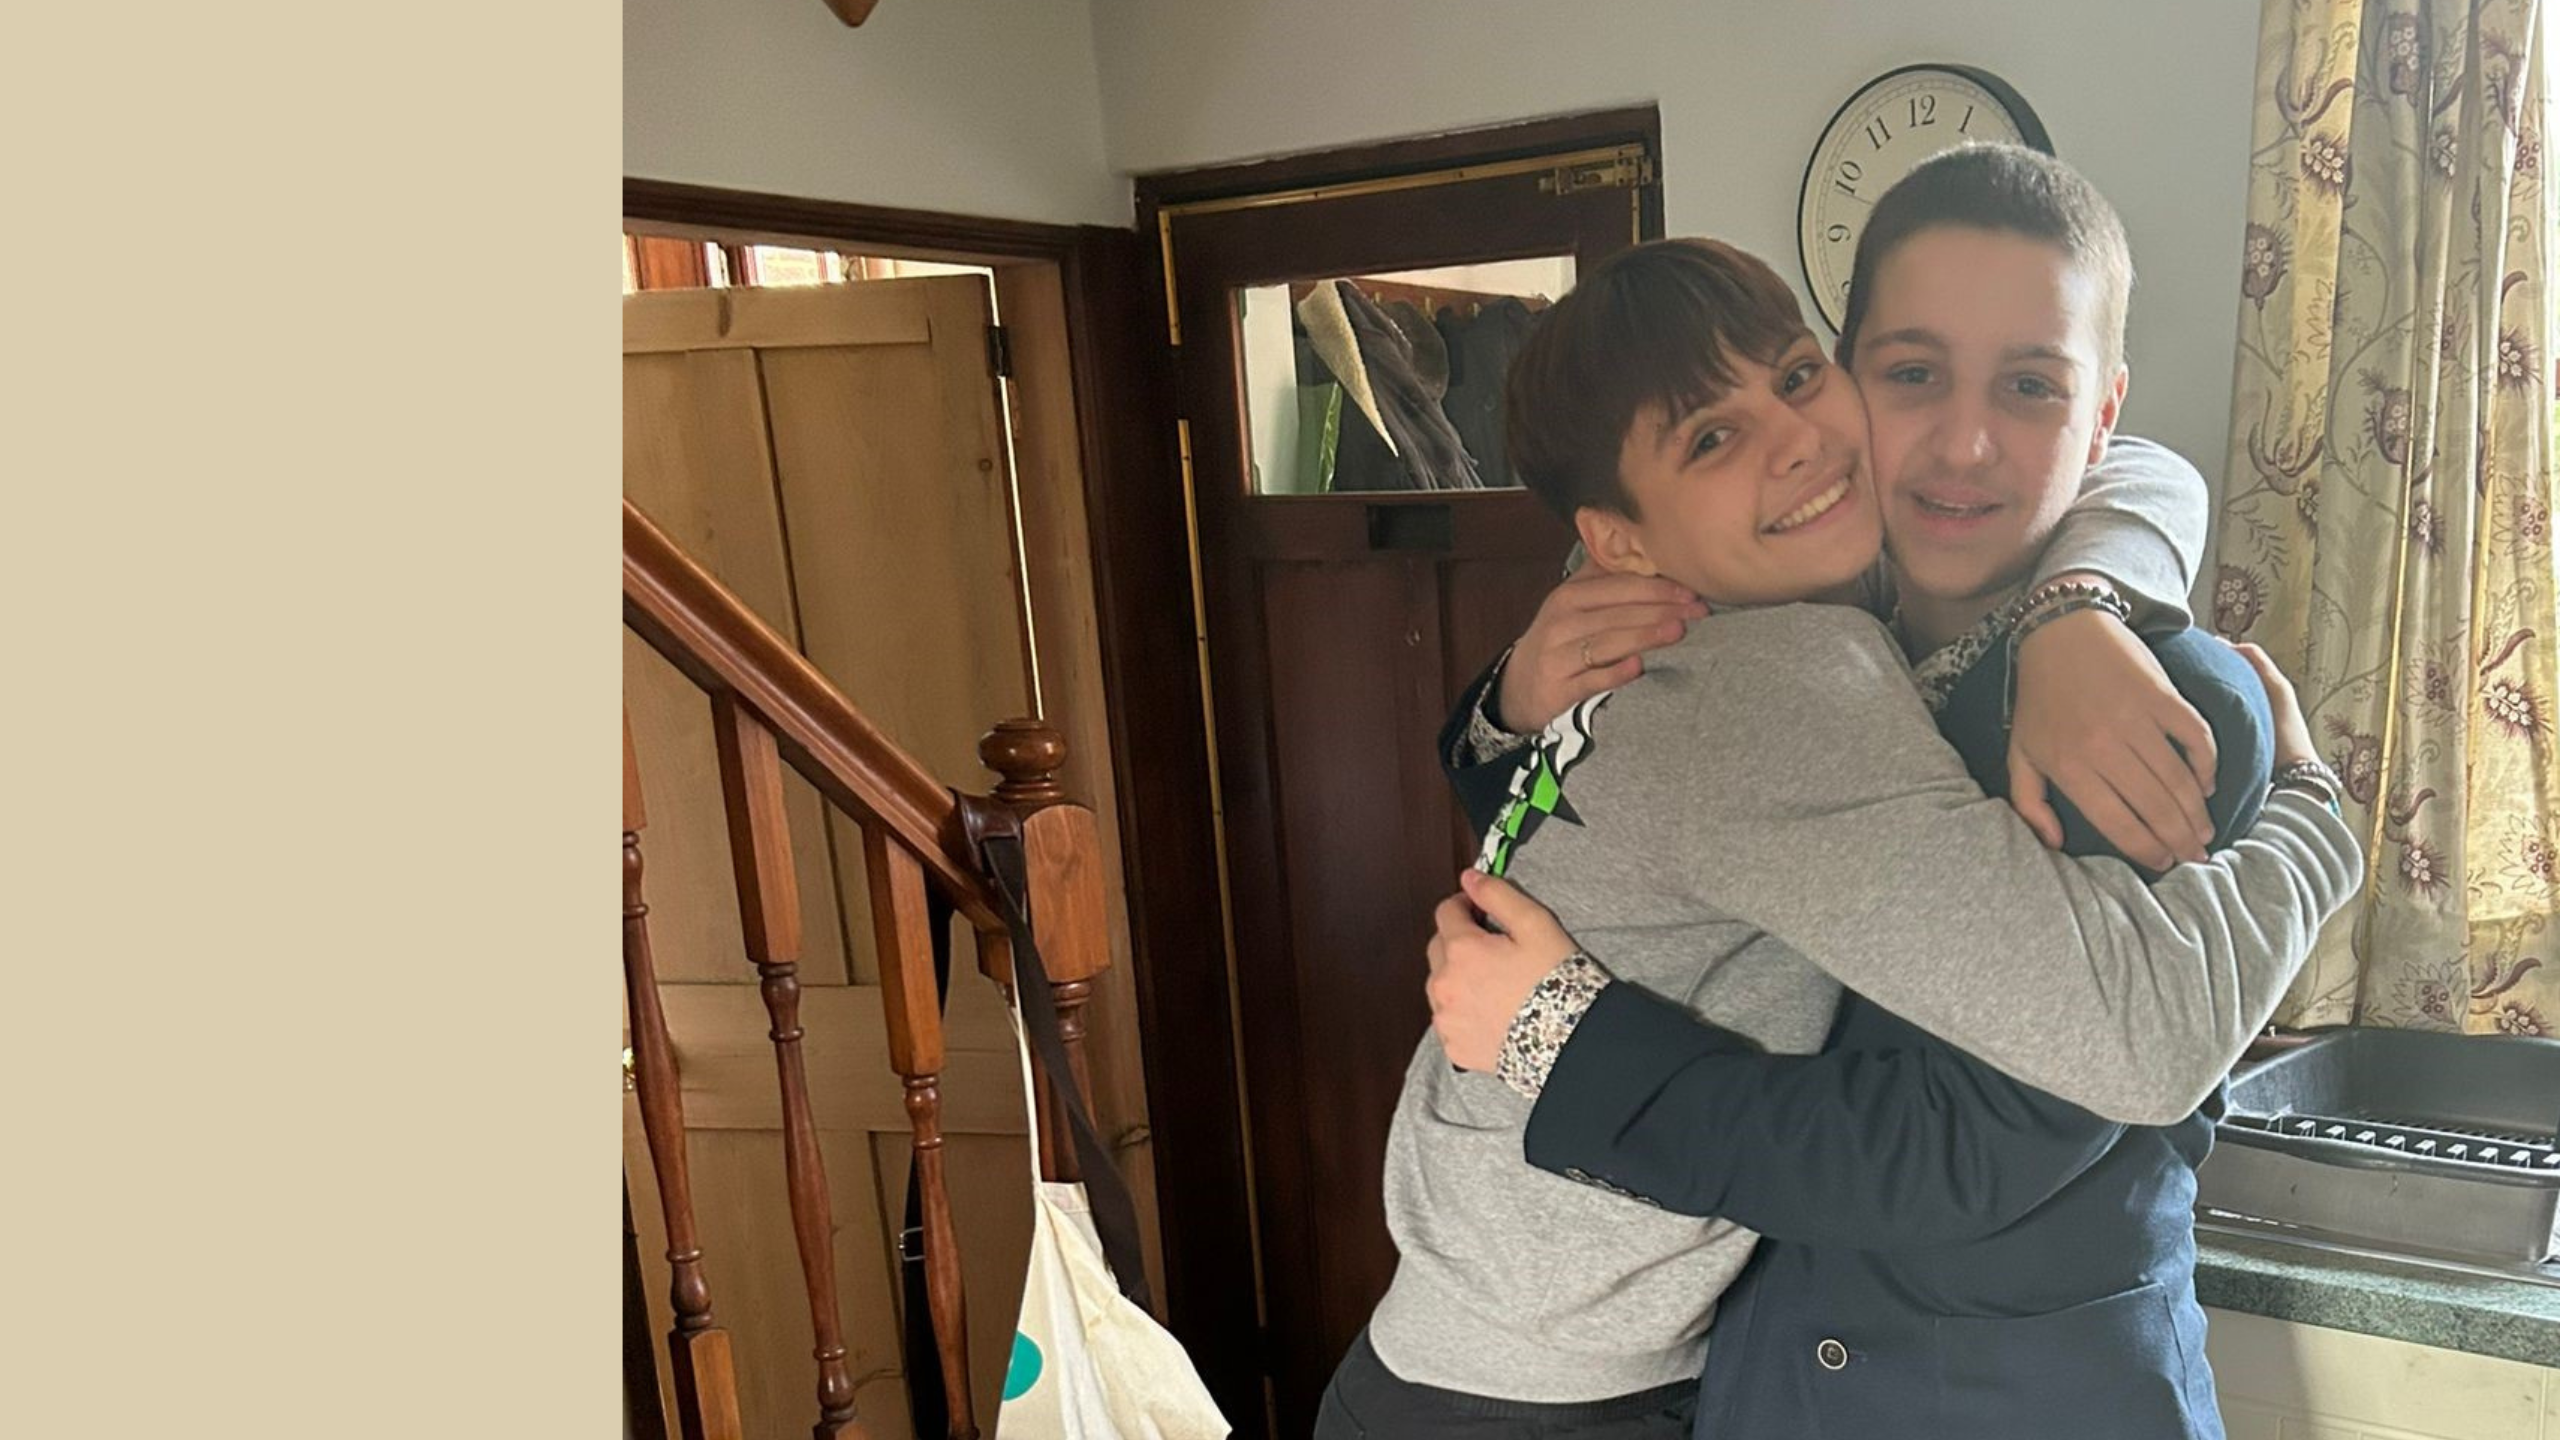 A brother and a sister hugging each other tightly, while looking at the camera. The boy on the right has very short brown hair and a navy jacket. The girl on the left has short brown hair and is wearing a grey sweatshirt. They are both smiling.